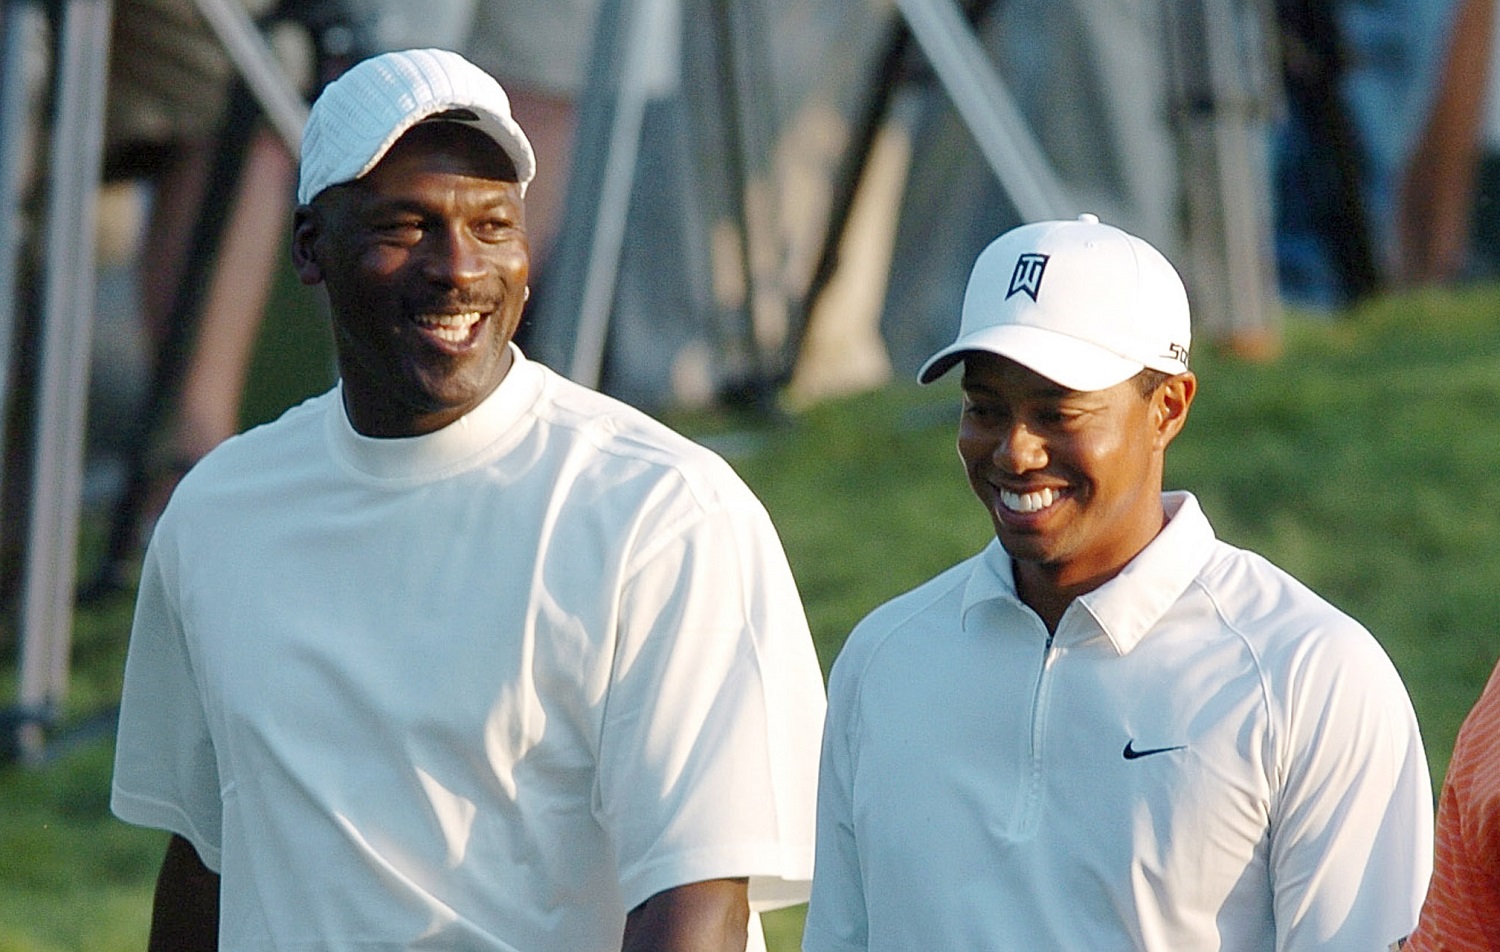 Tiger Woods doubted that Michael Jordan could crack 92 on the Bethpage Black golf course that hosted the 2009 U.S. Open. | John D. Simmons/Charlotte Observer/Tribune News Service via Getty Images